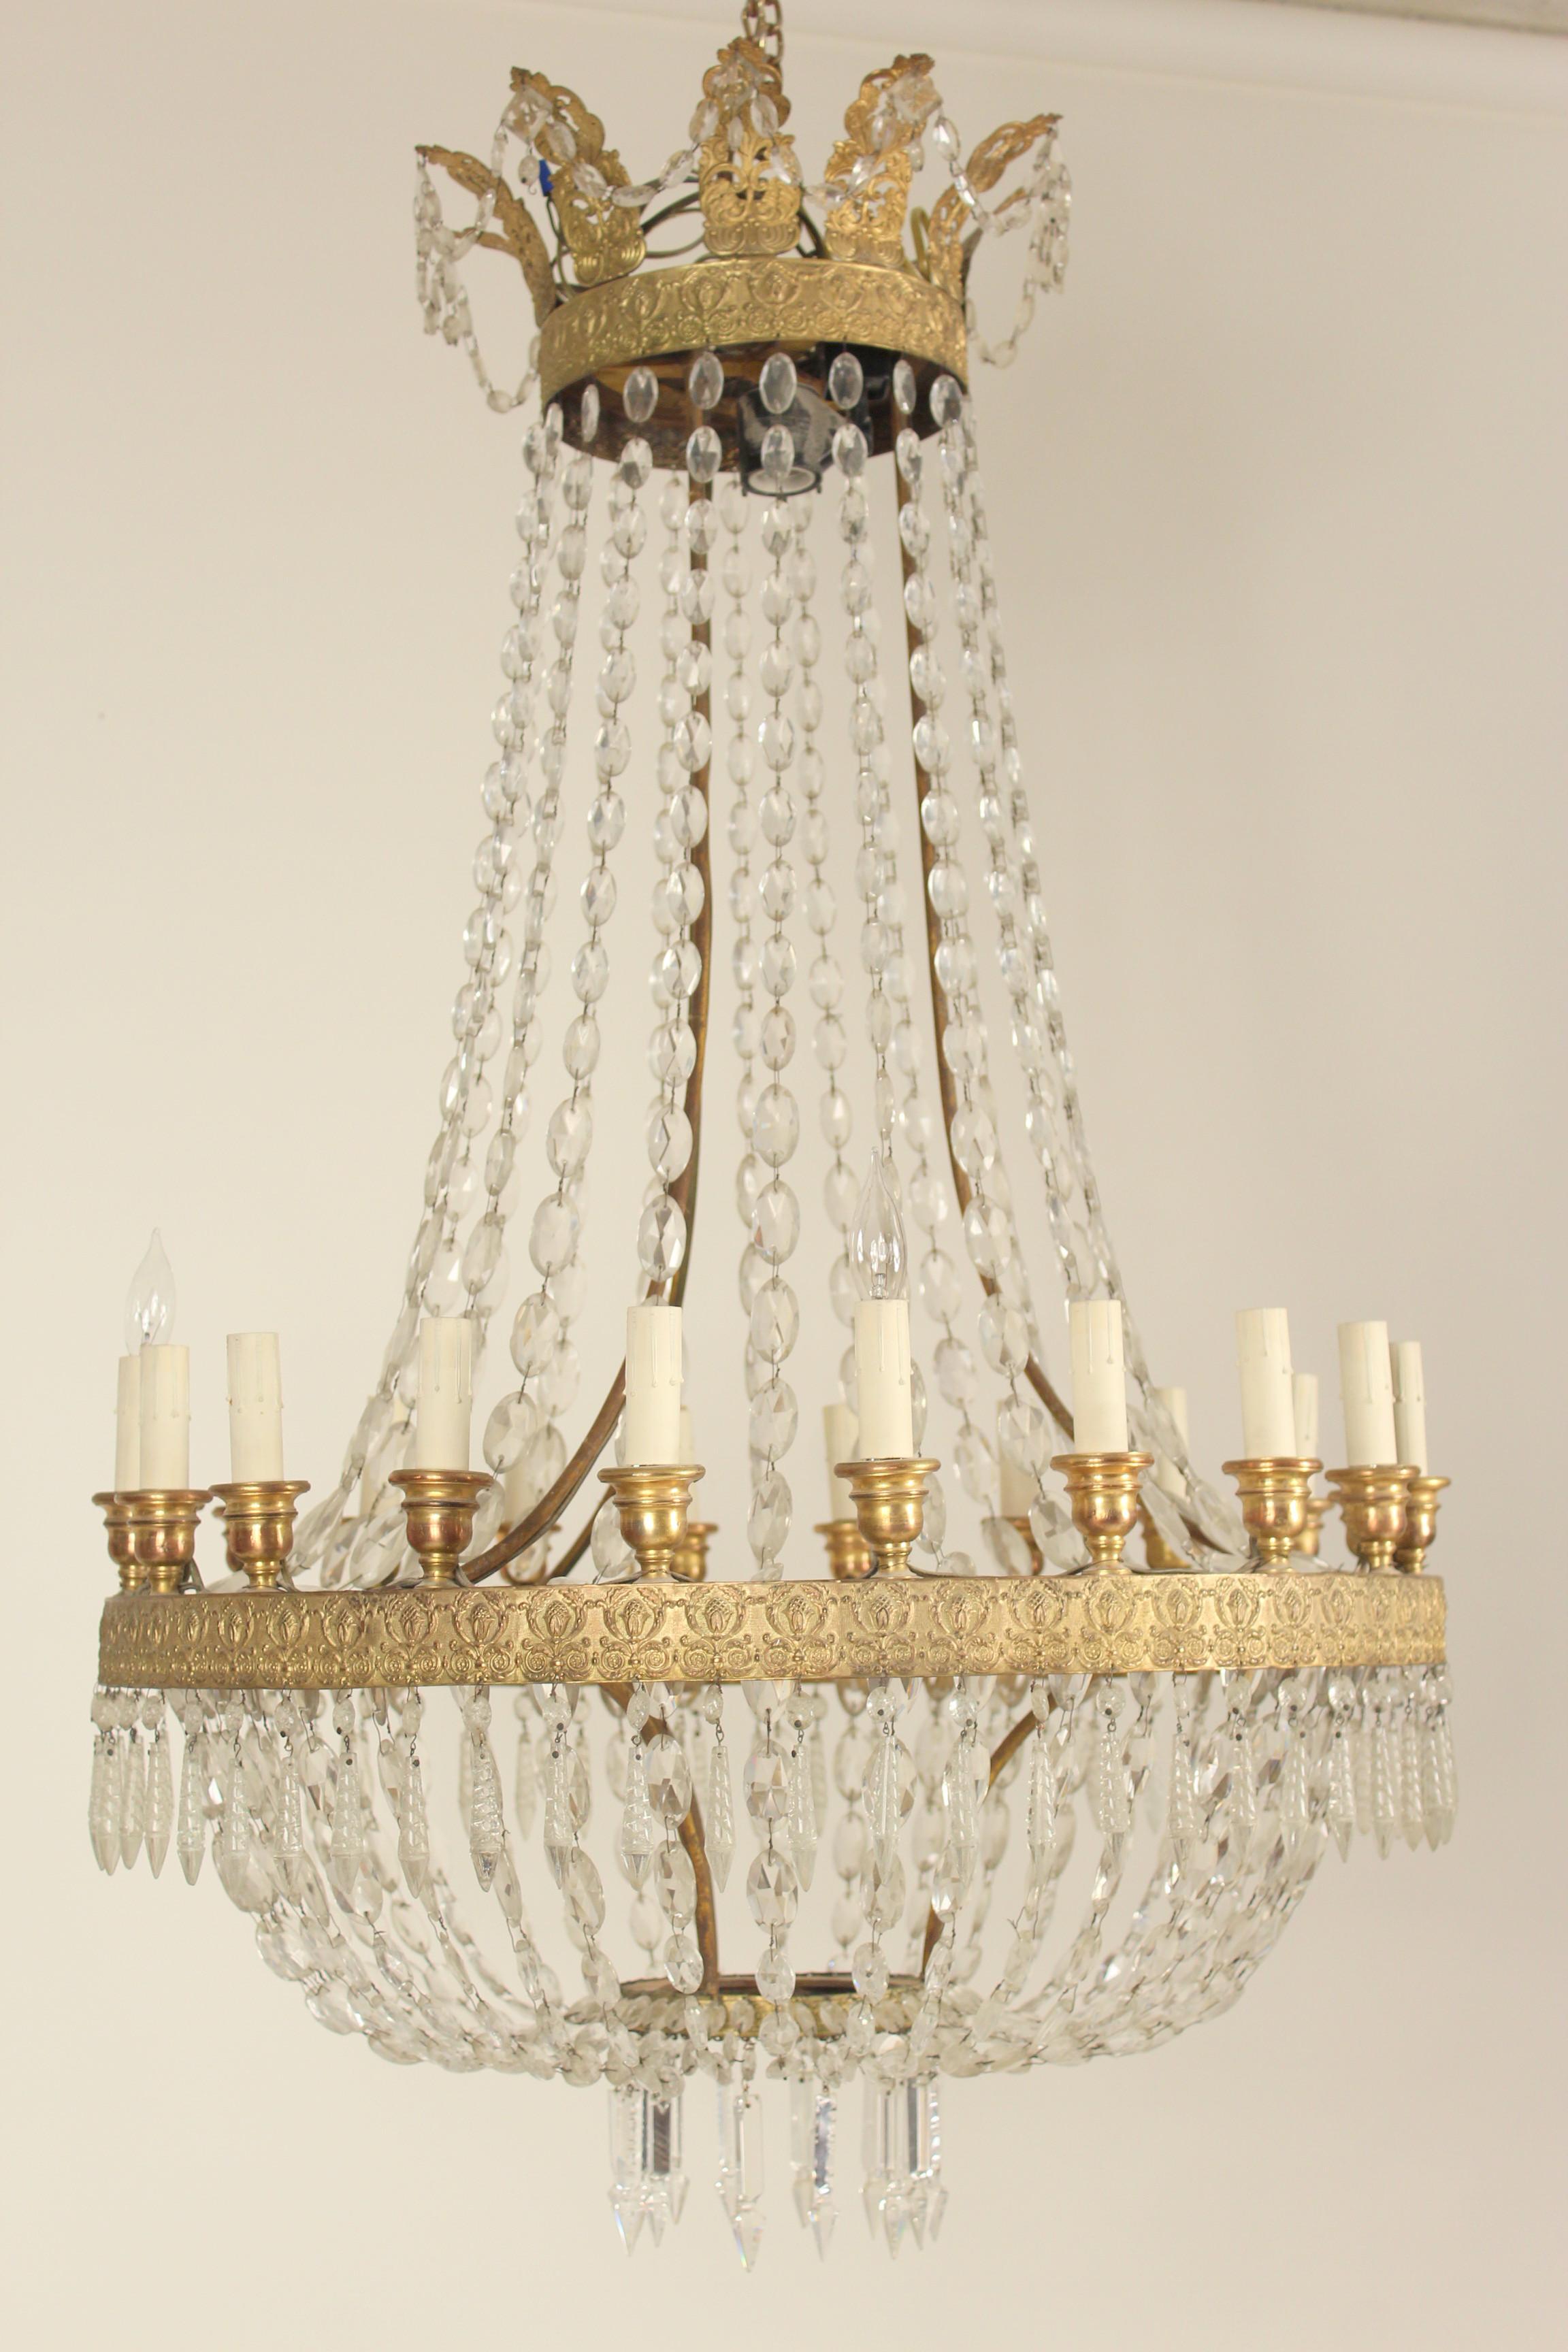 Neoclassical style gilt bronze and crystal 20-light chandelier, approximately 50-70 years old.